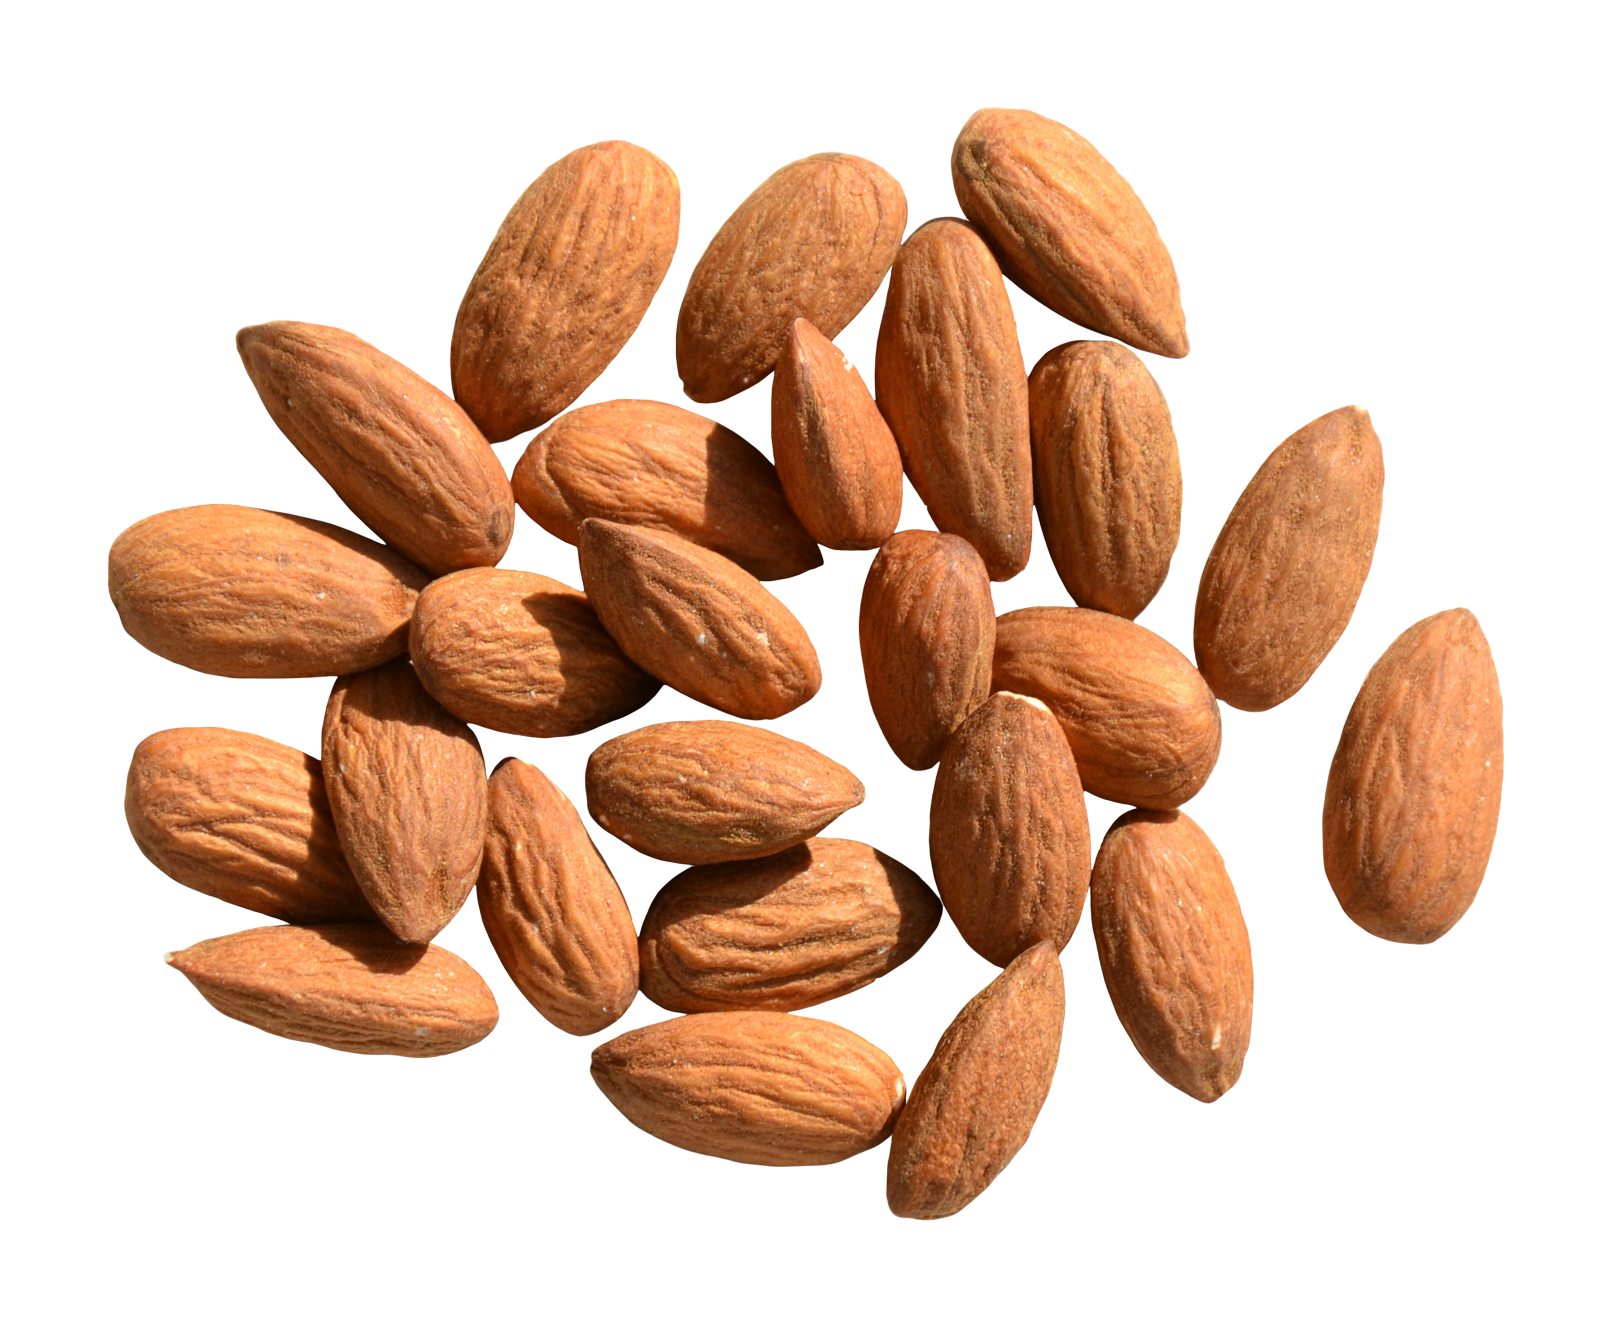 A Group Of Almonds On A Black Background